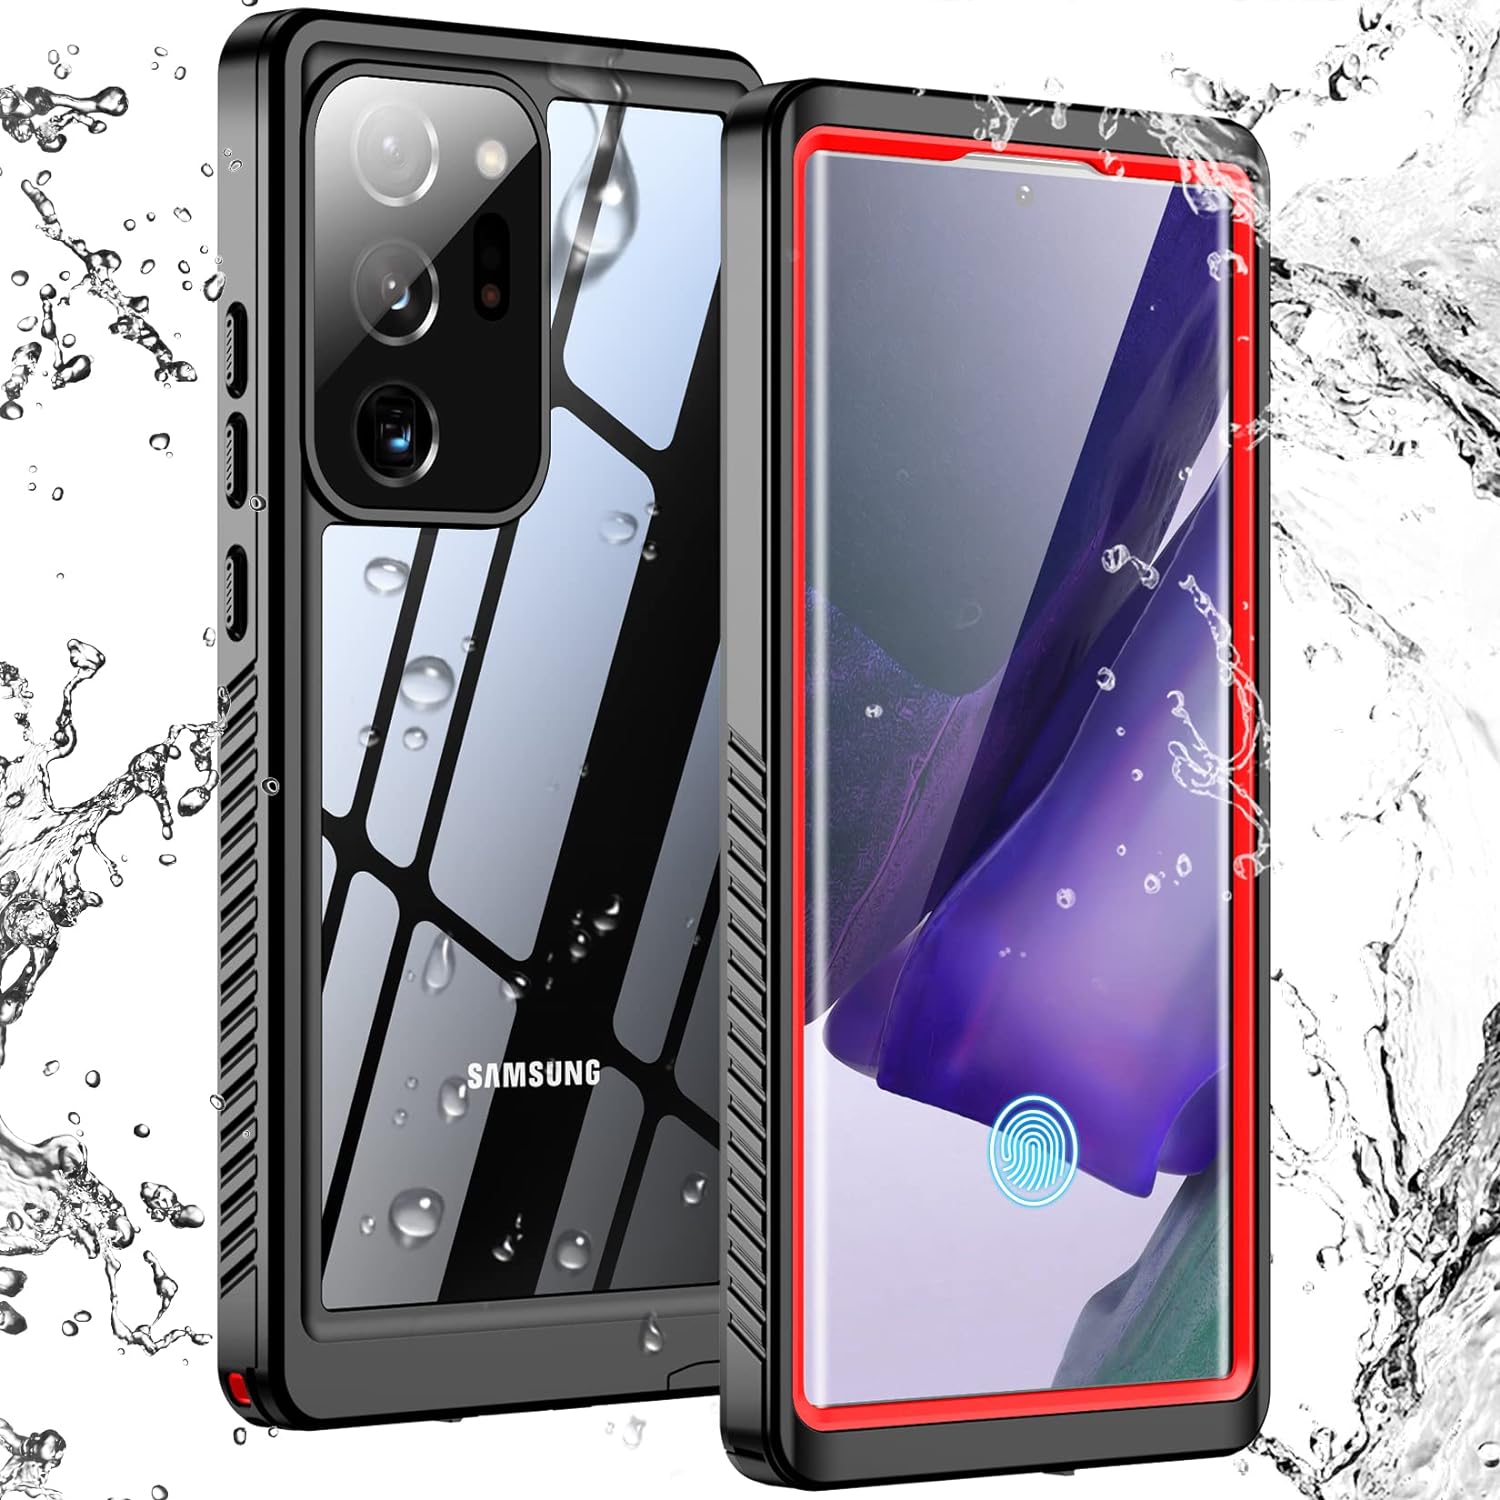 Temdan for Samsung Galaxy Note 20 Ultra Case Waterproof, Built in Screen Protector 360 Full Body Heavy Duty Shockproof IP68 Waterproof Note 20 Ultra Case for Samsung Note 20 Ultra 5G 6.9-Red